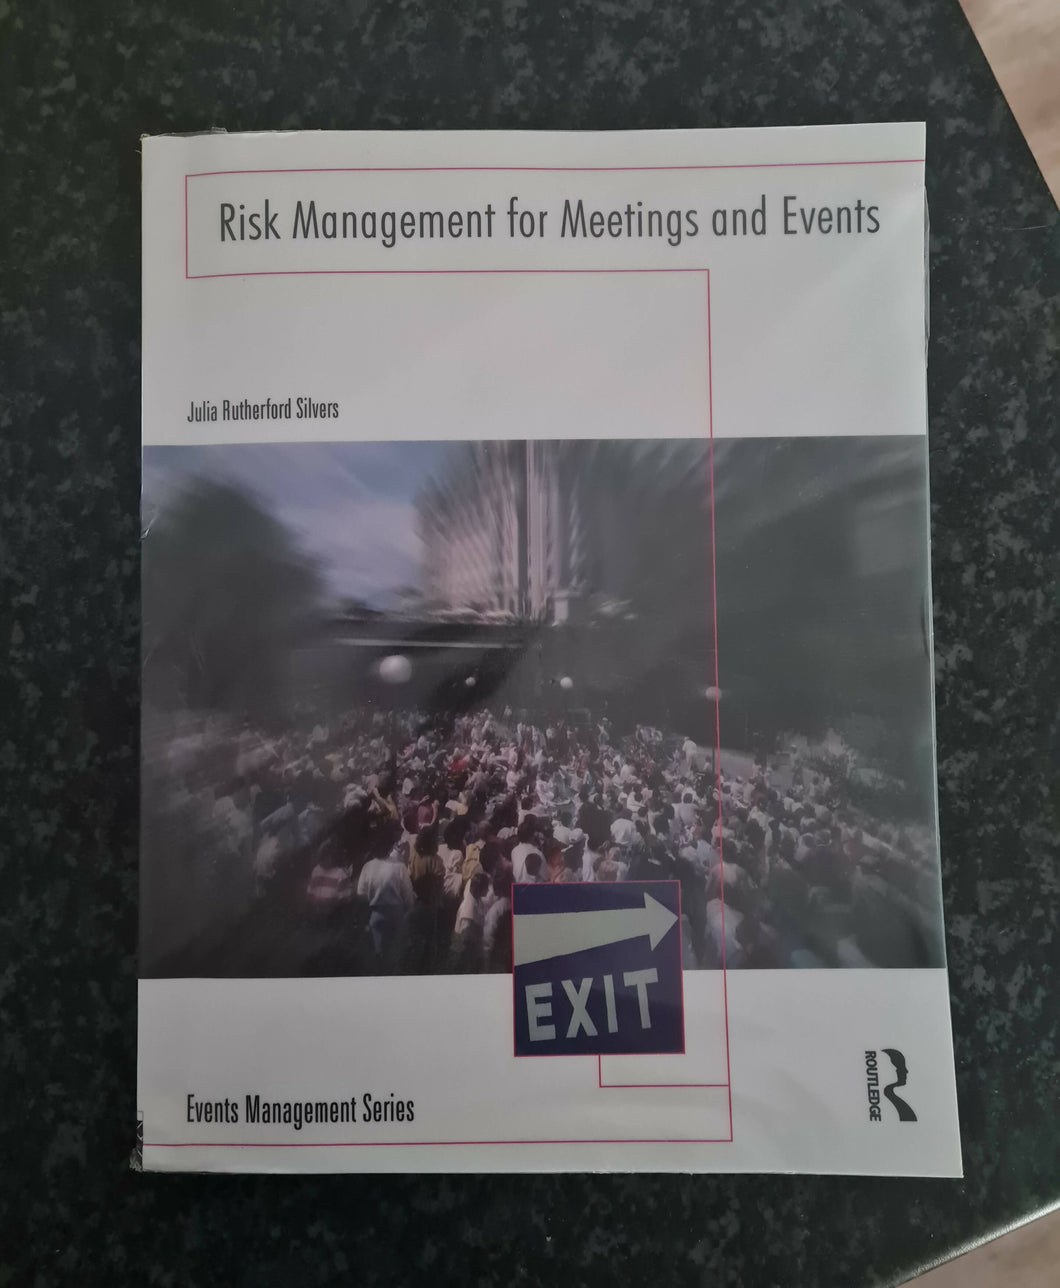 Risk Management for Meetings and Events